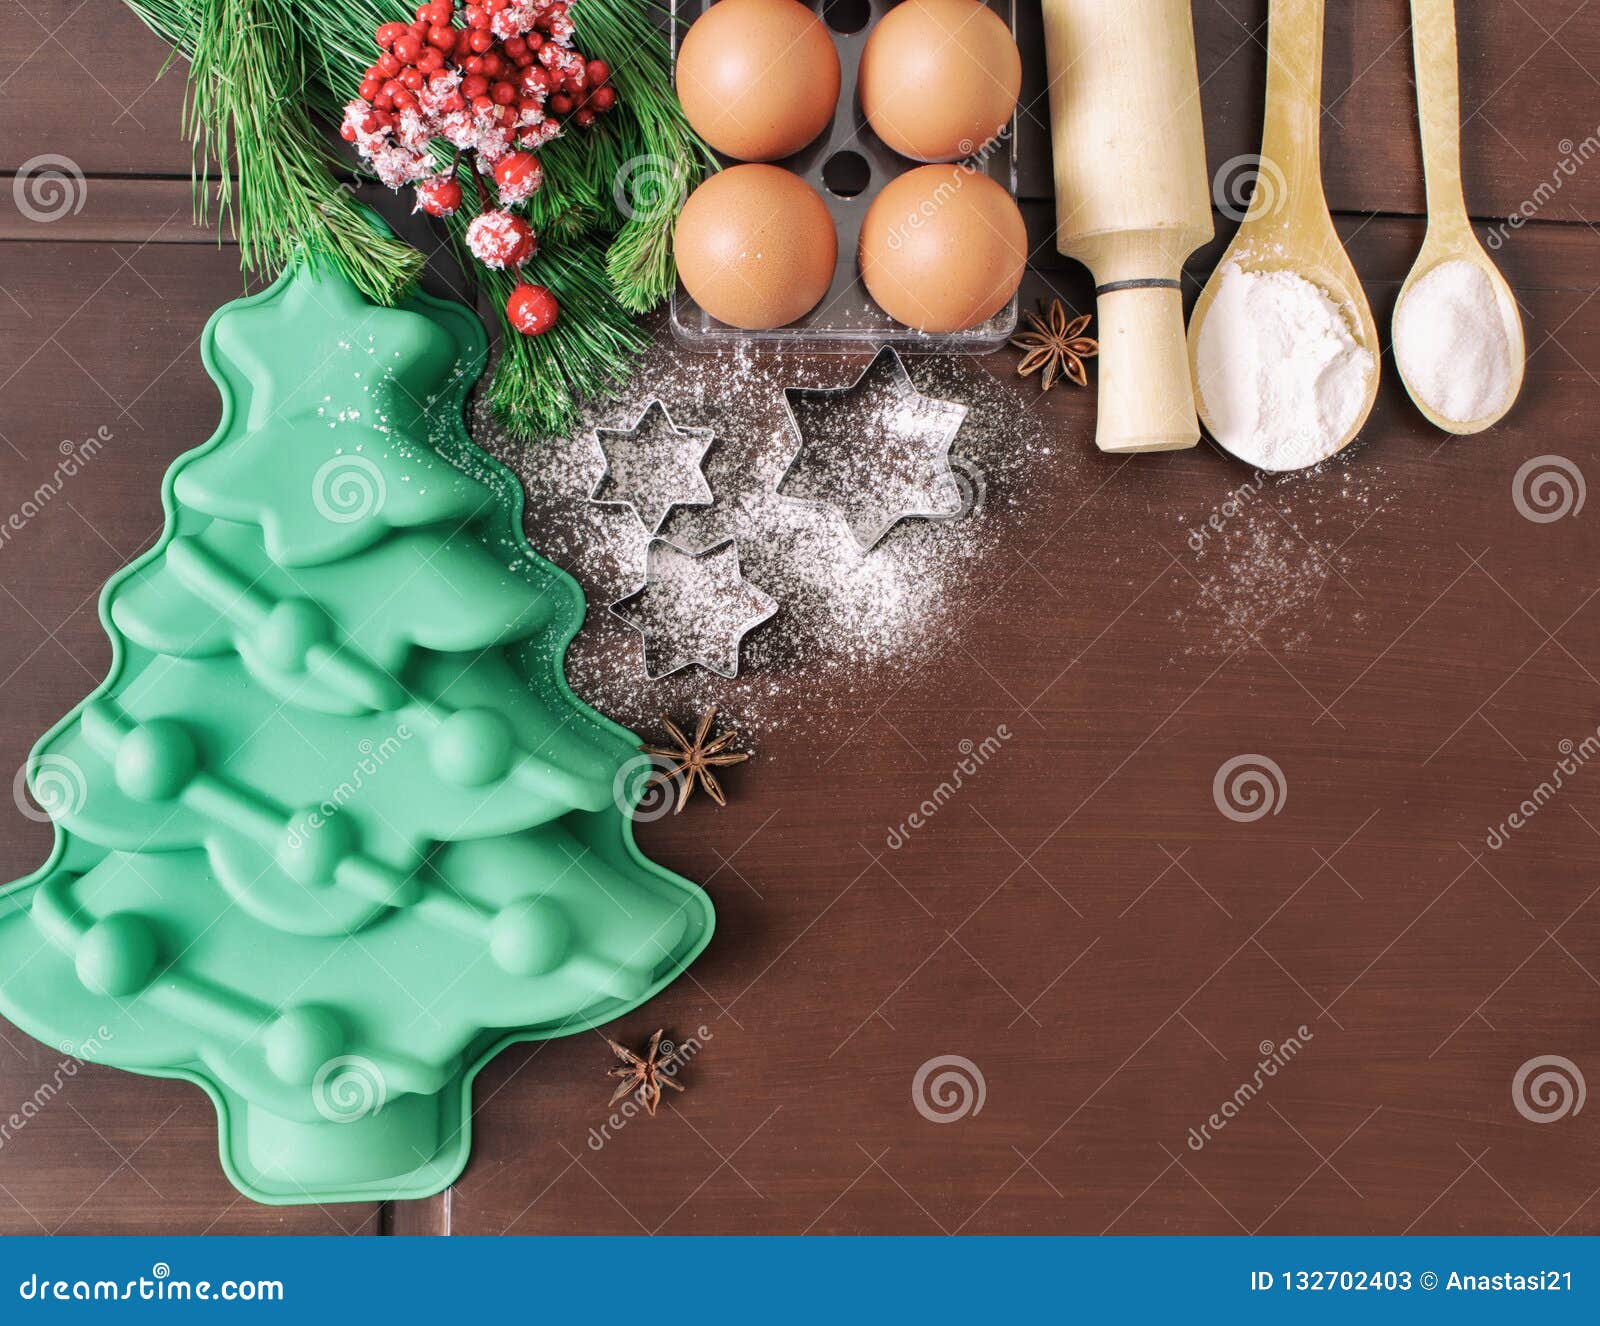 Christmas Baking Cake Background. Ingredients and Tools for Baking - Flour,  Eggs, Silicone Molds in the Shape of a Christmas Tree, Stock Image - Image  of menu, country: 132702403